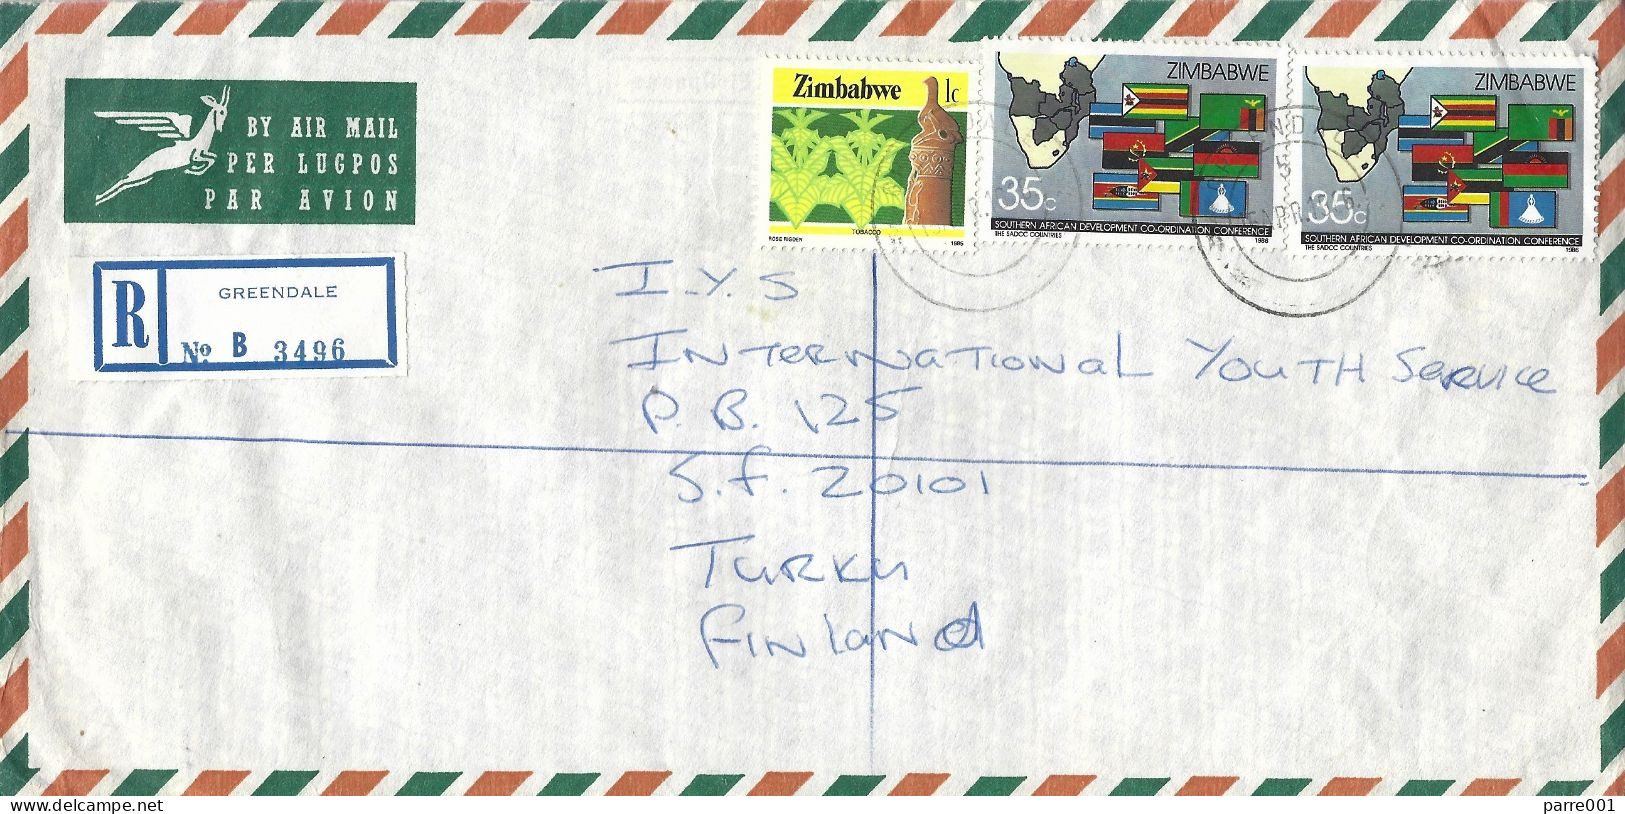 Zimbabwe 1986 Greendale Flag SADCC Cooperation Tobacco Registered Cover - Covers